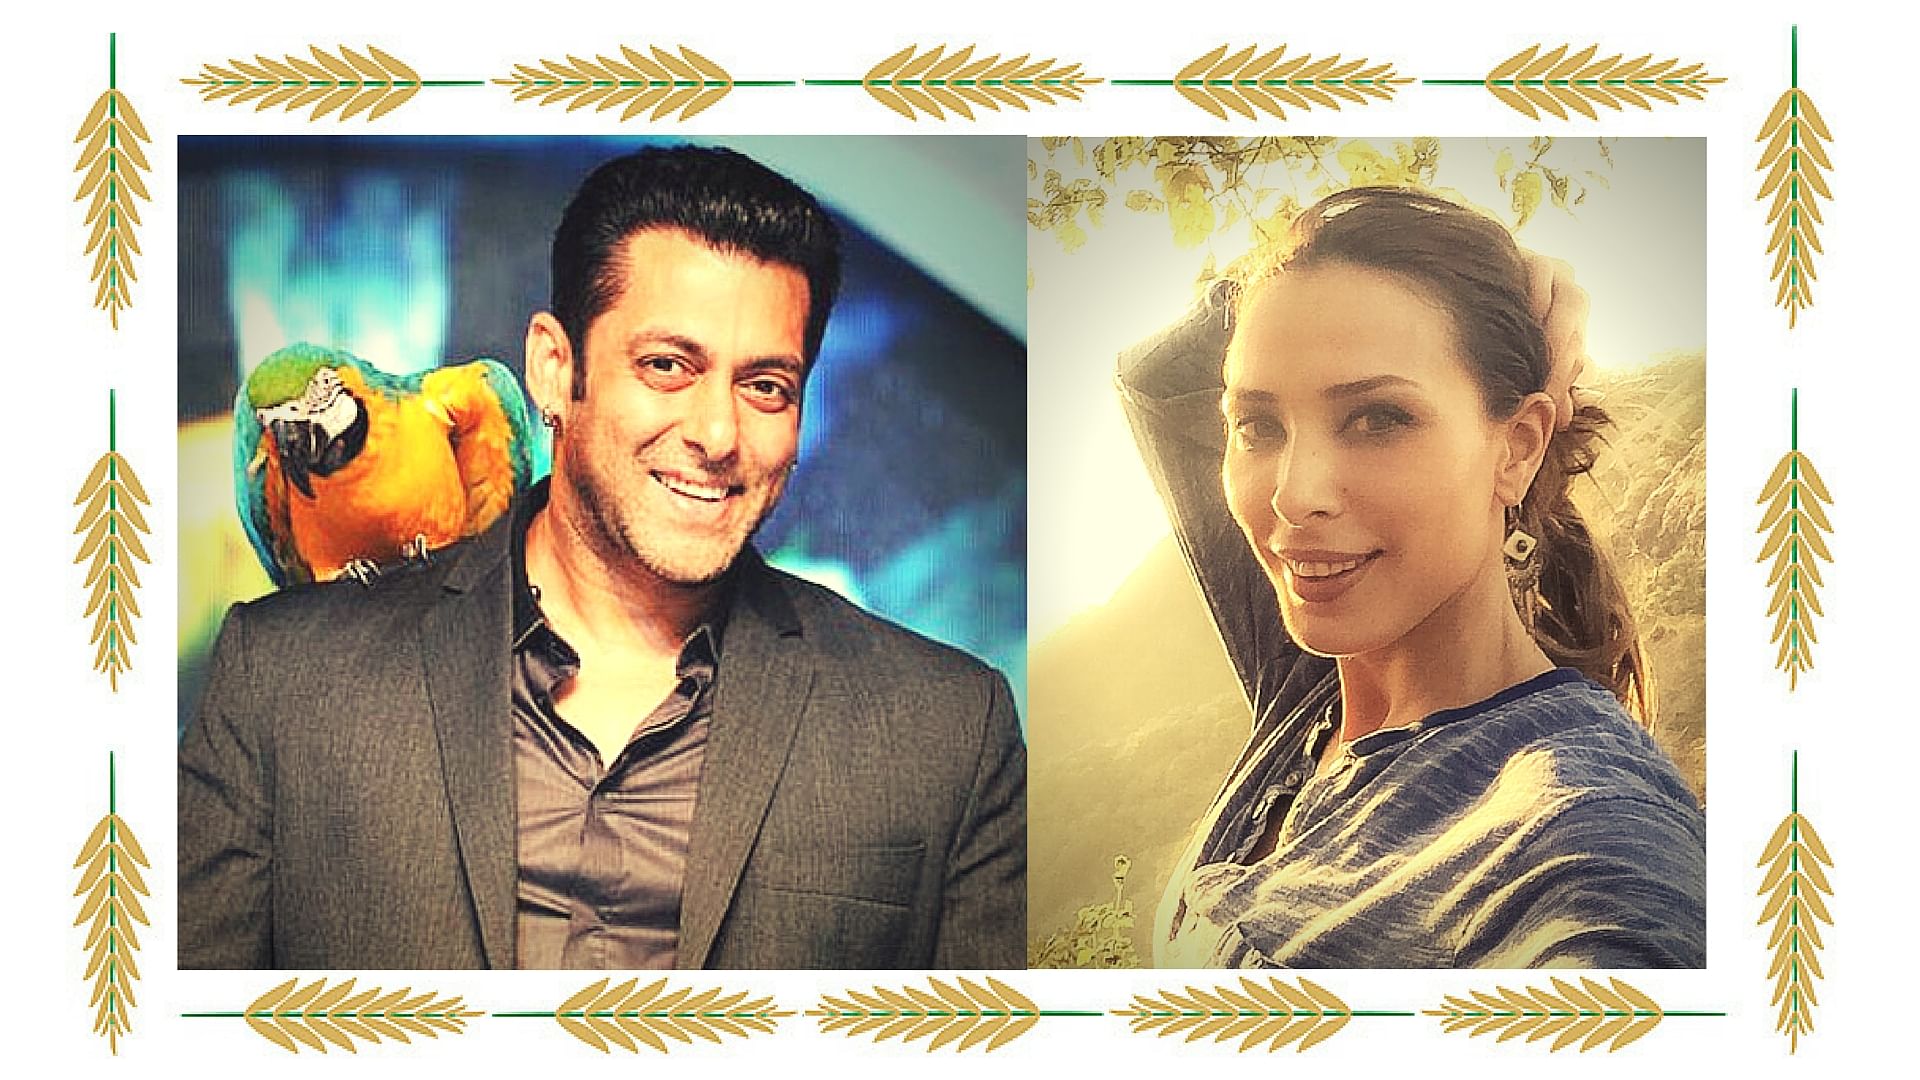 Salman Khan to host a reality TV show with rumoured girlfriend Iulia Vantur (Photo: Twitter; altered by The Quint)